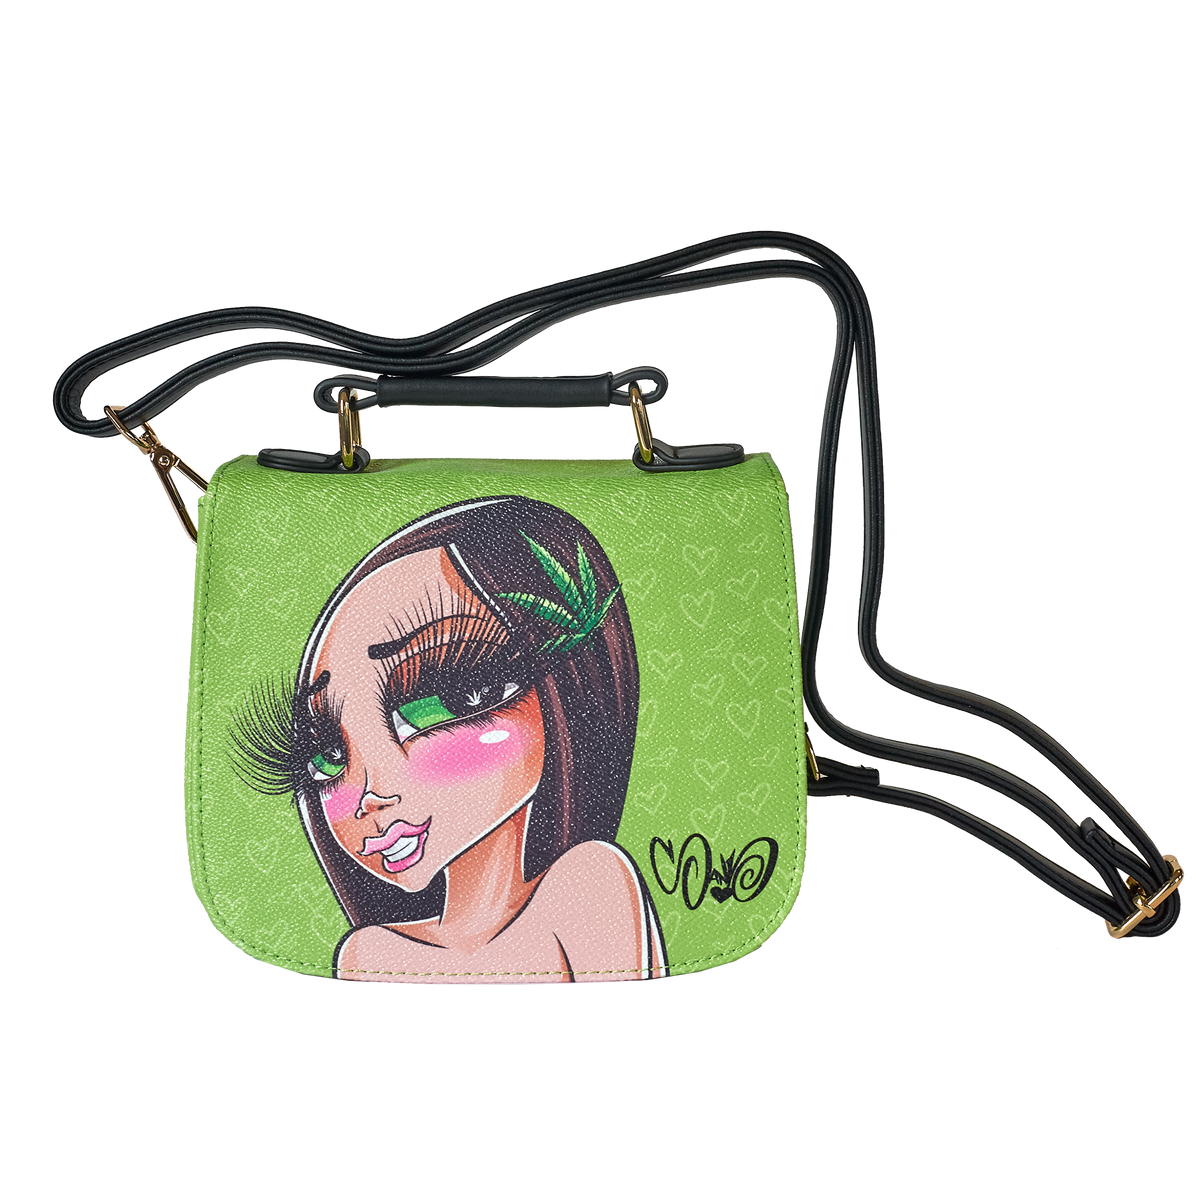 Funny Graffiti Style Little Monster With Doll Crossbody Small